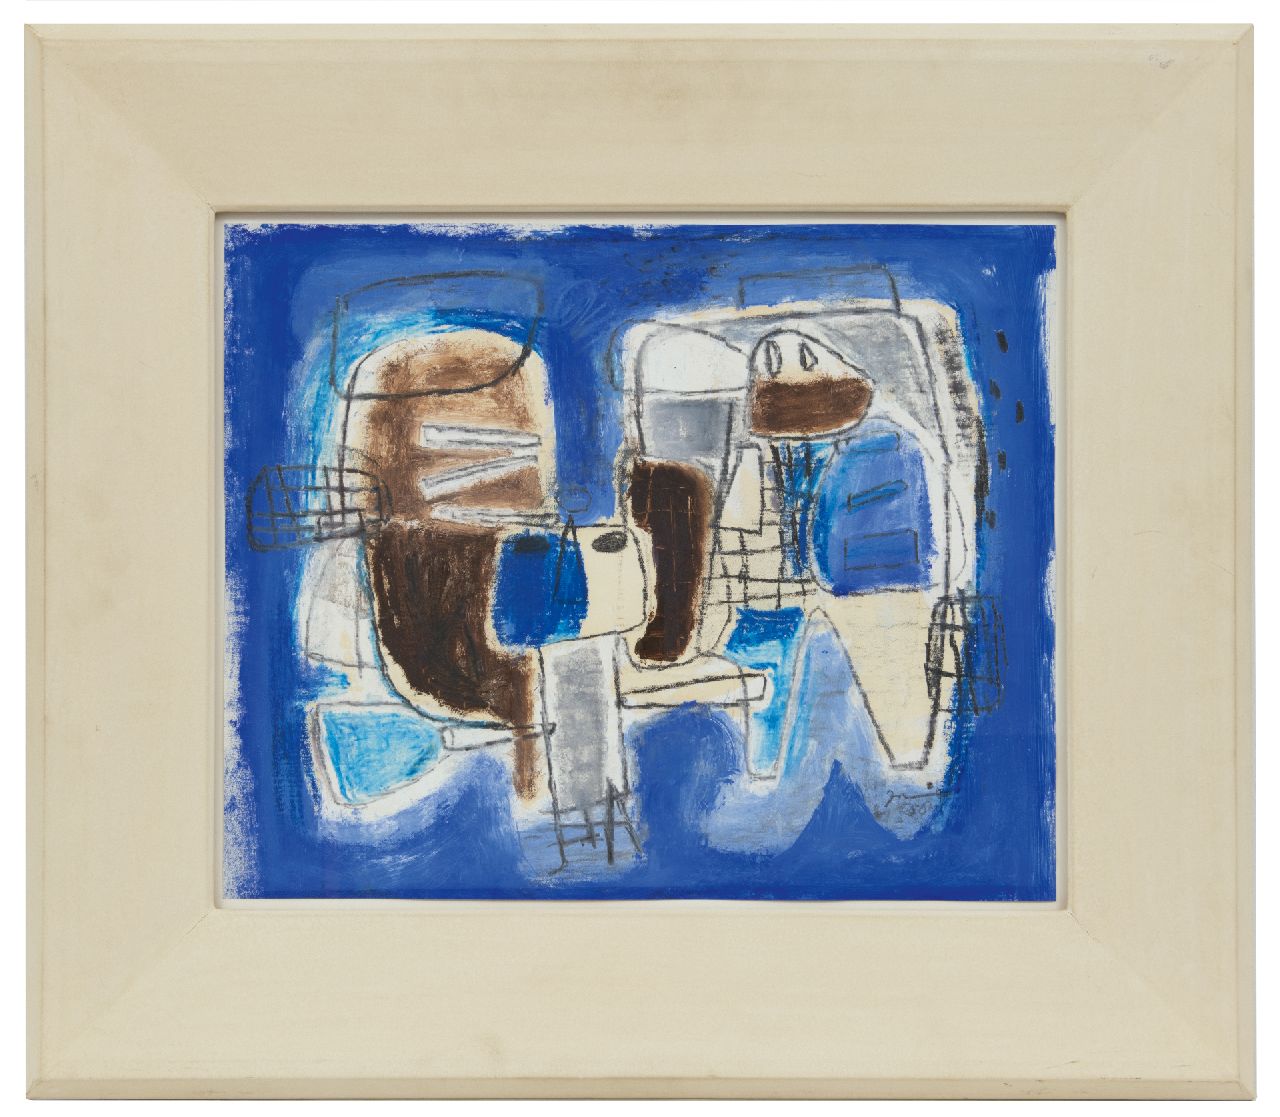 Nanninga J.  | Jacob 'Jaap' Nanninga | Watercolours and drawings offered for sale | Composition with two figures, pencil and gouache on paper 40.0 x 50.0 cm, signed l.r. and dated '58